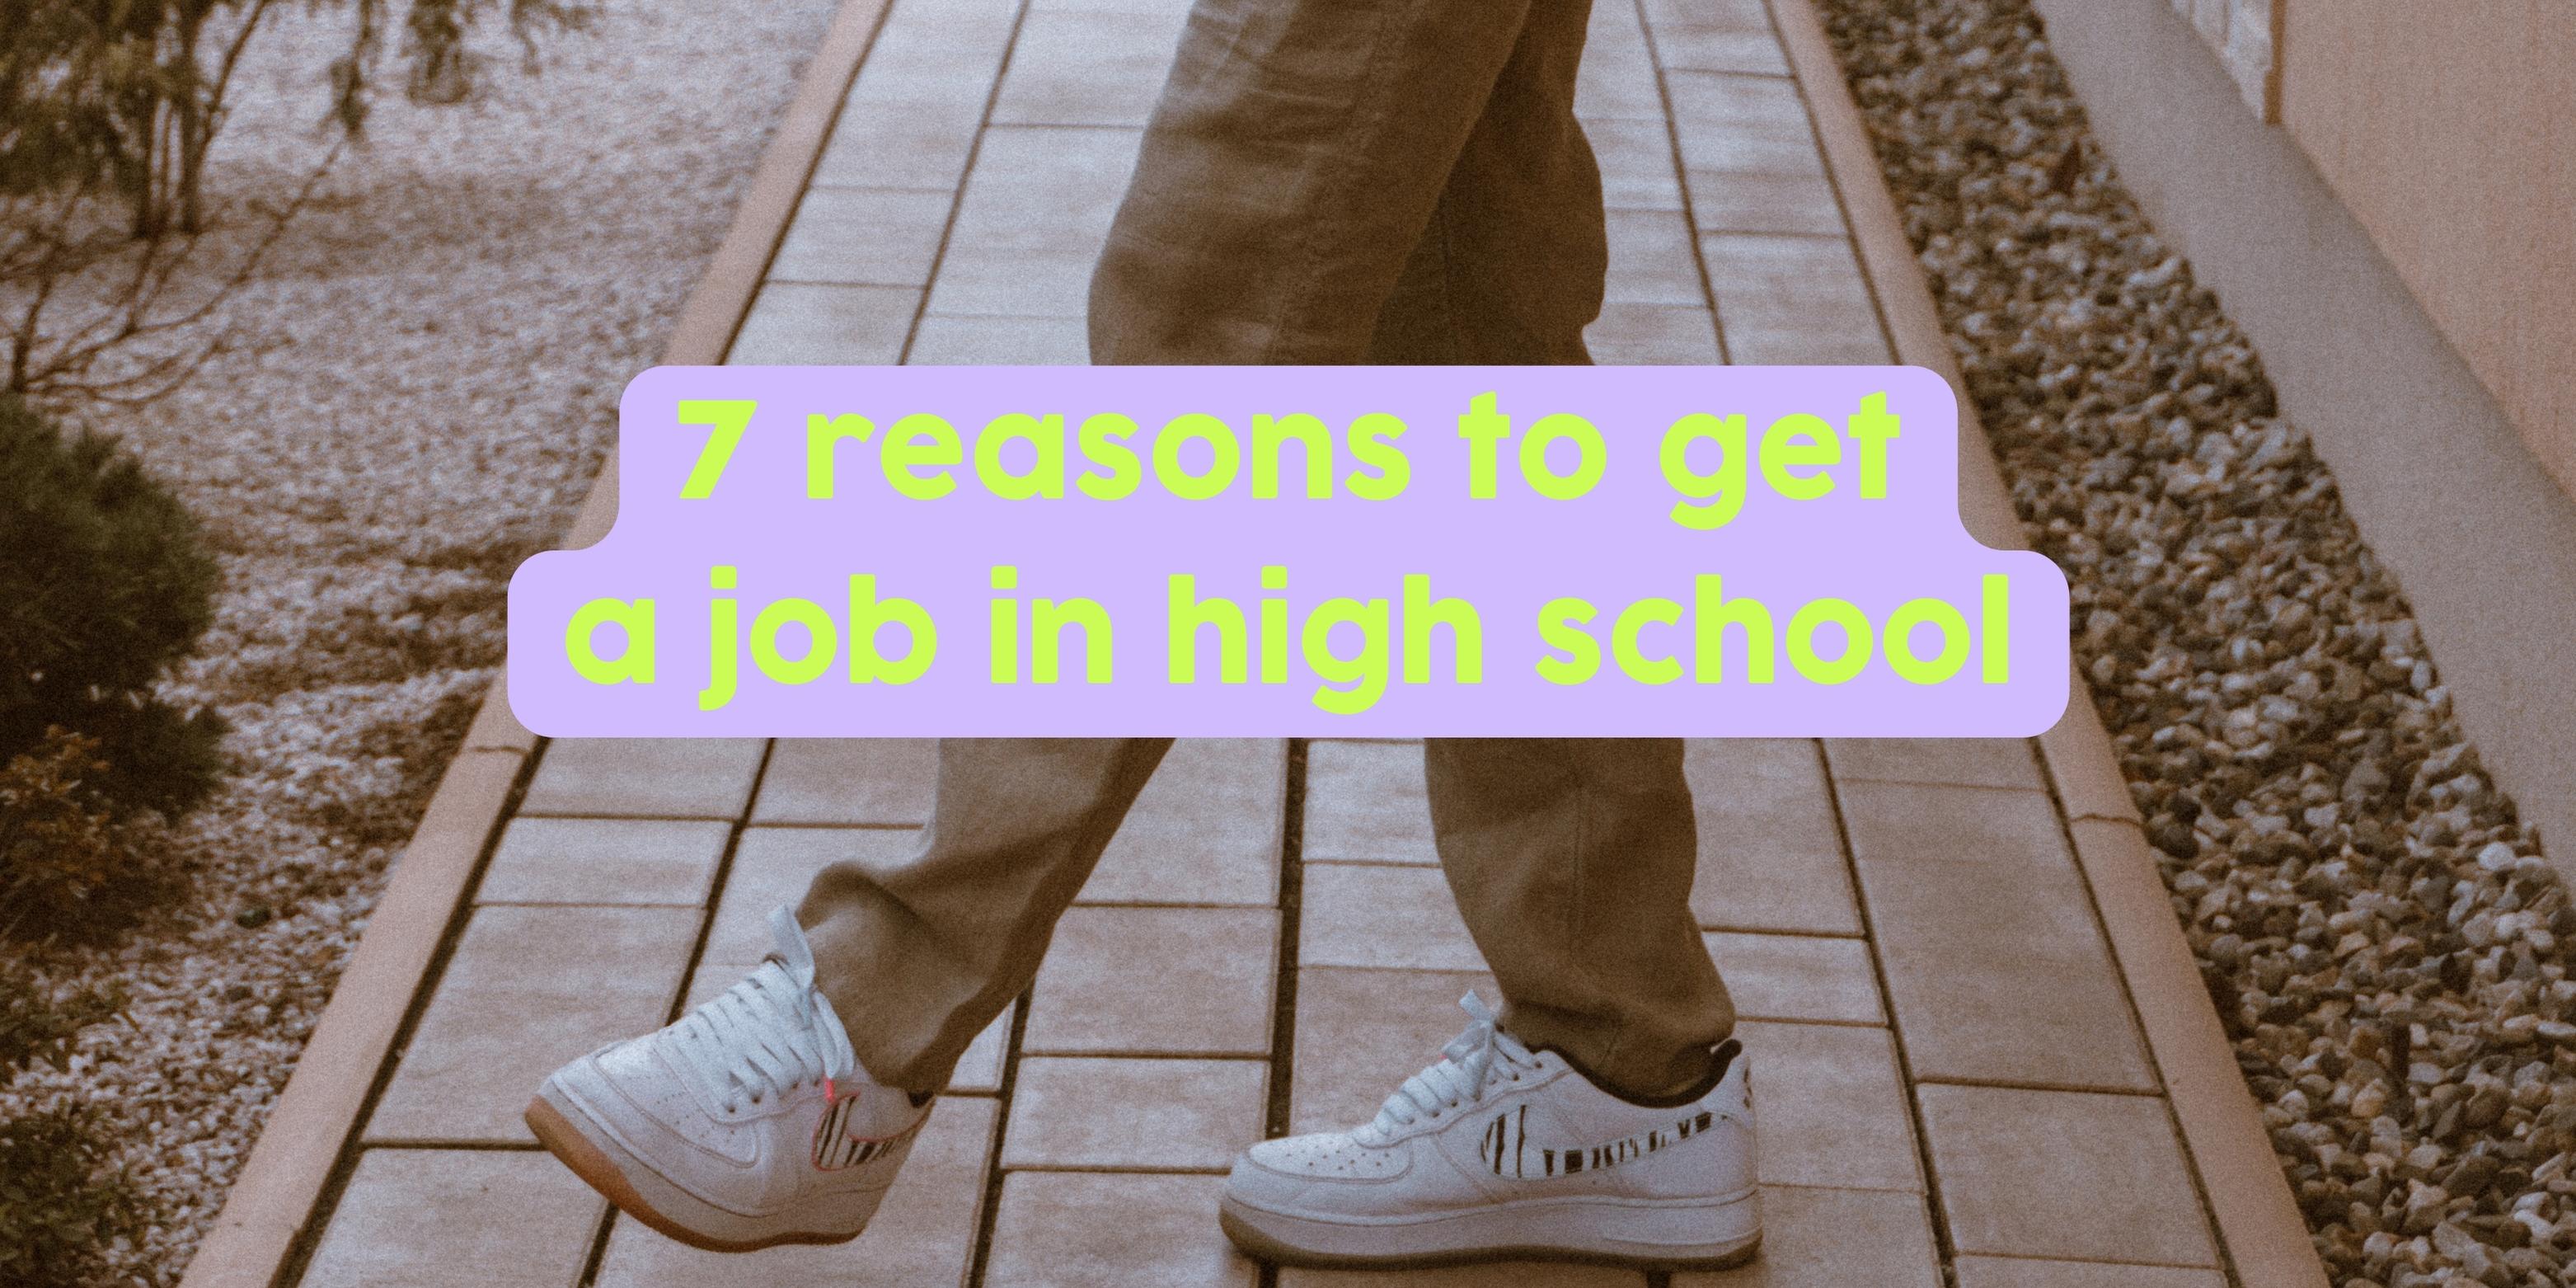 7 Reasons to get a job in High School